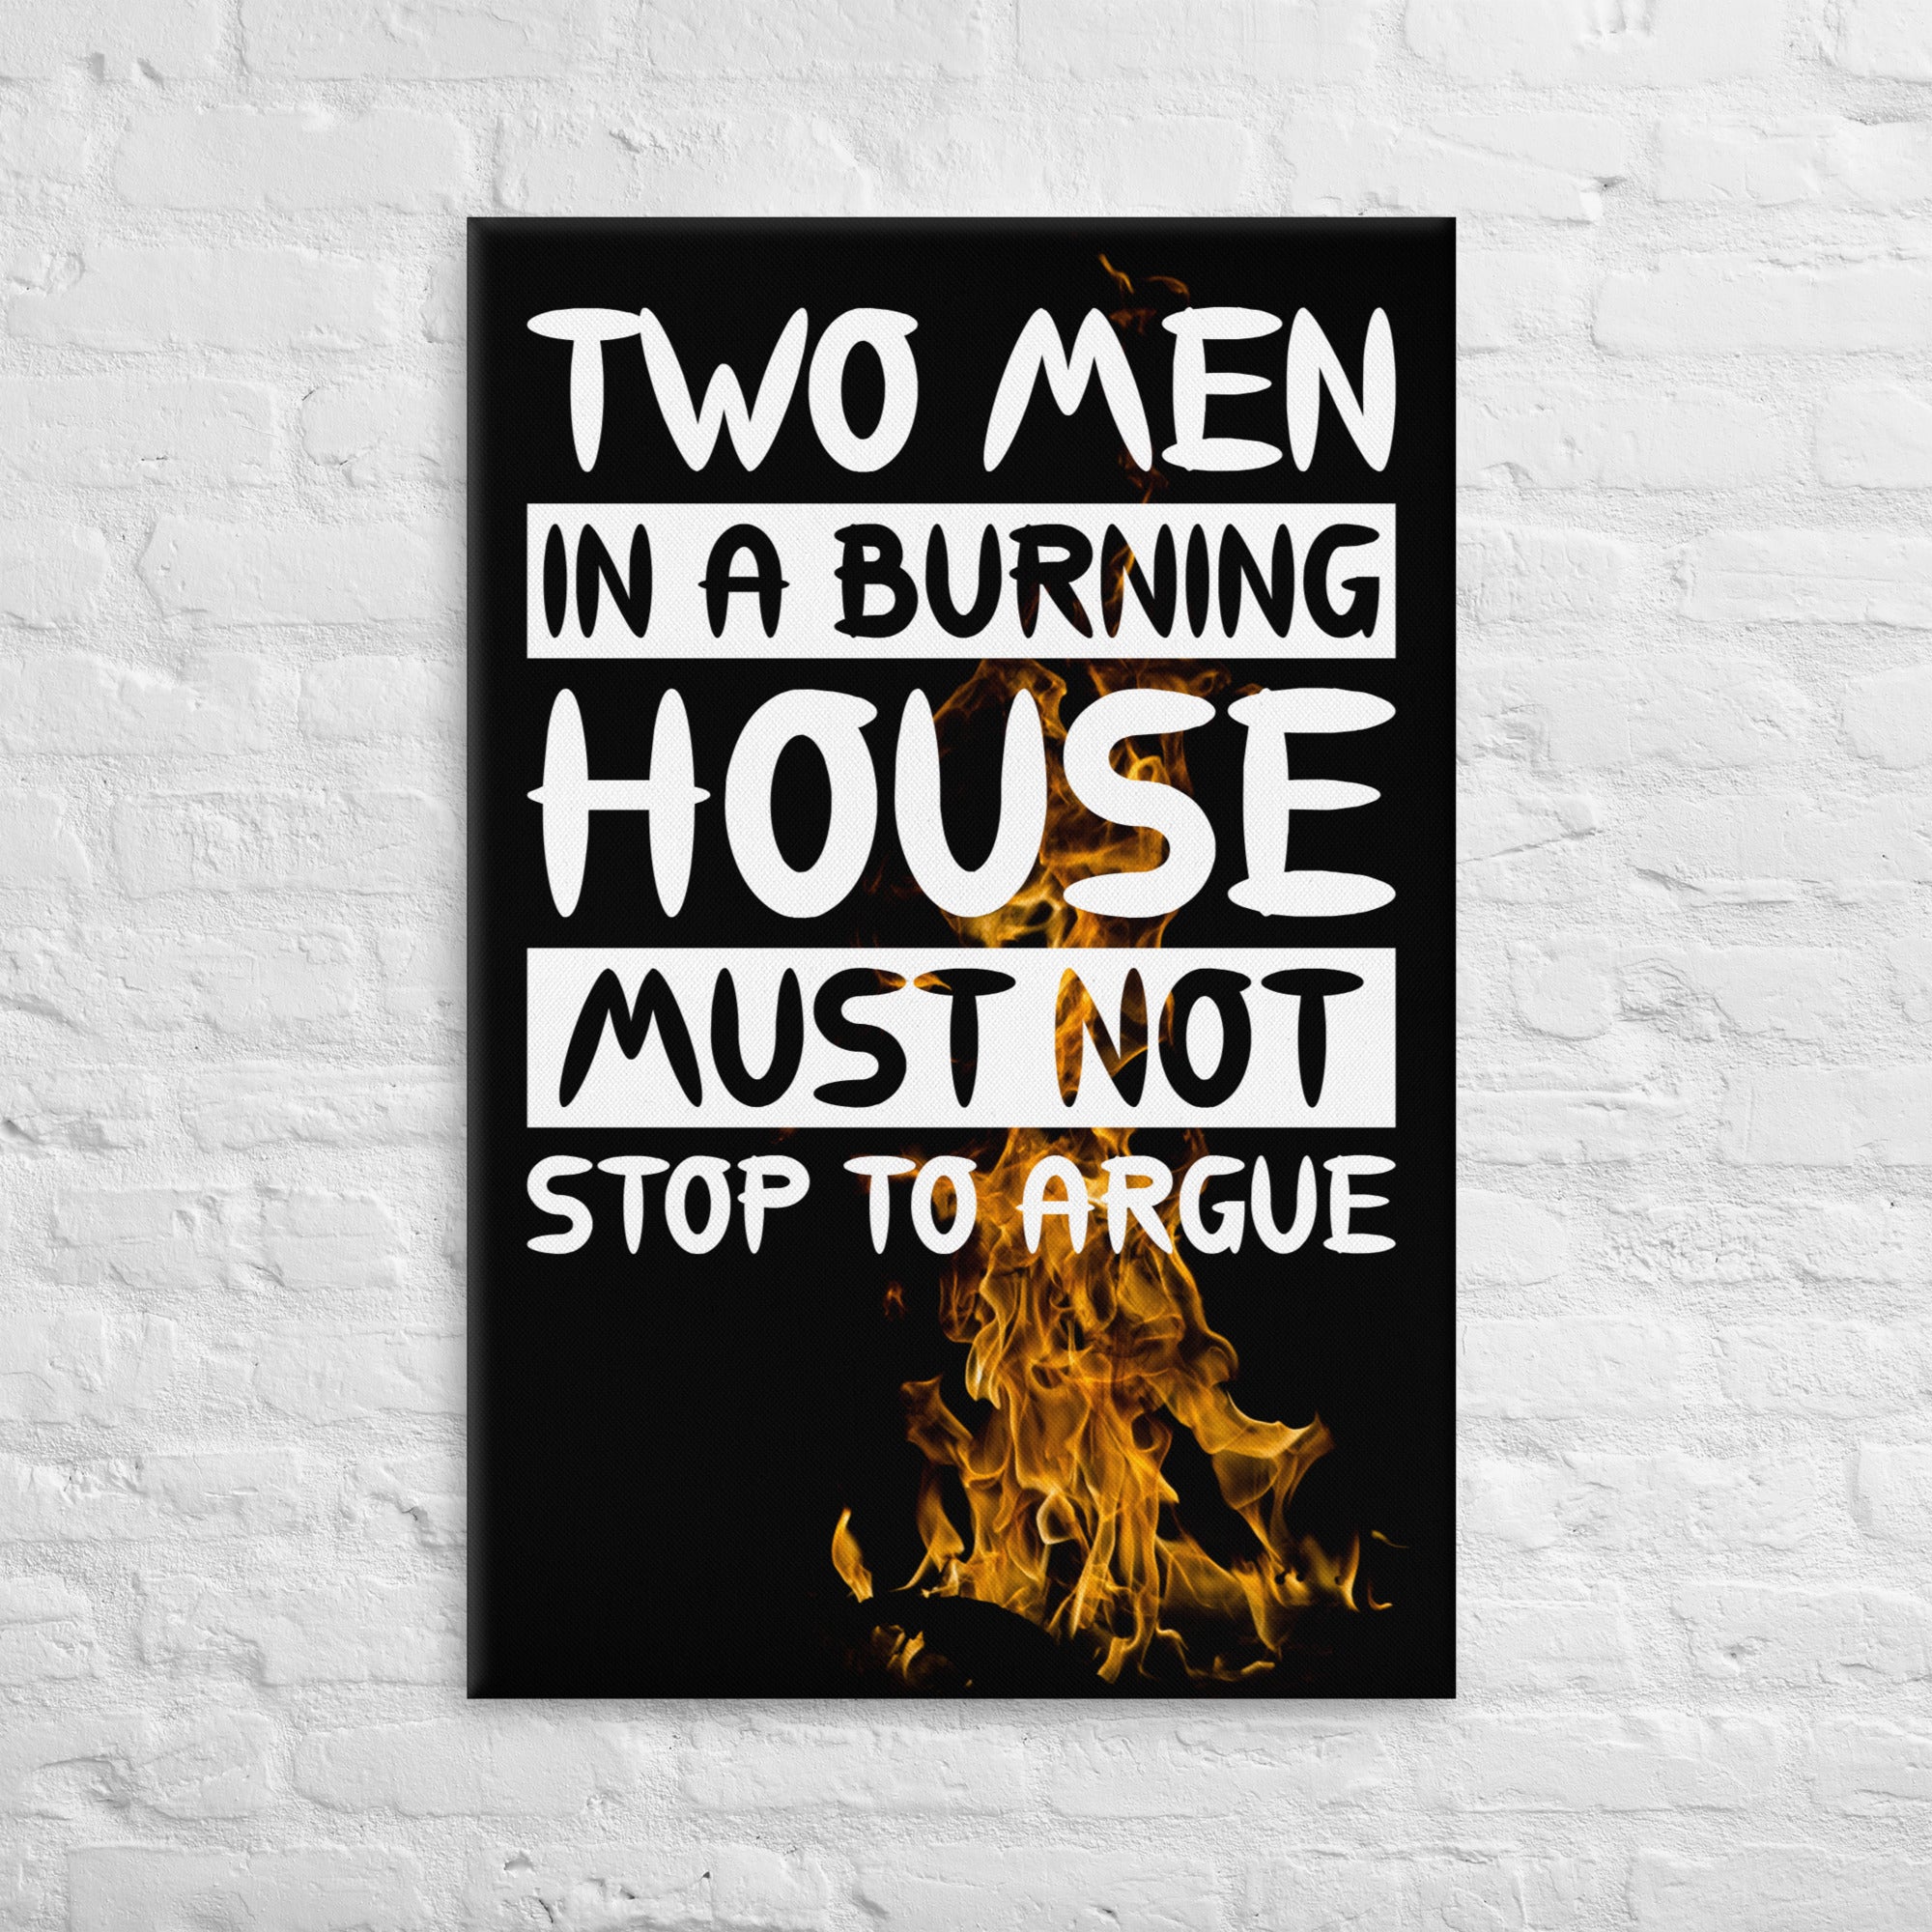 Two Men In A Burning House Should Not Stop to Argue